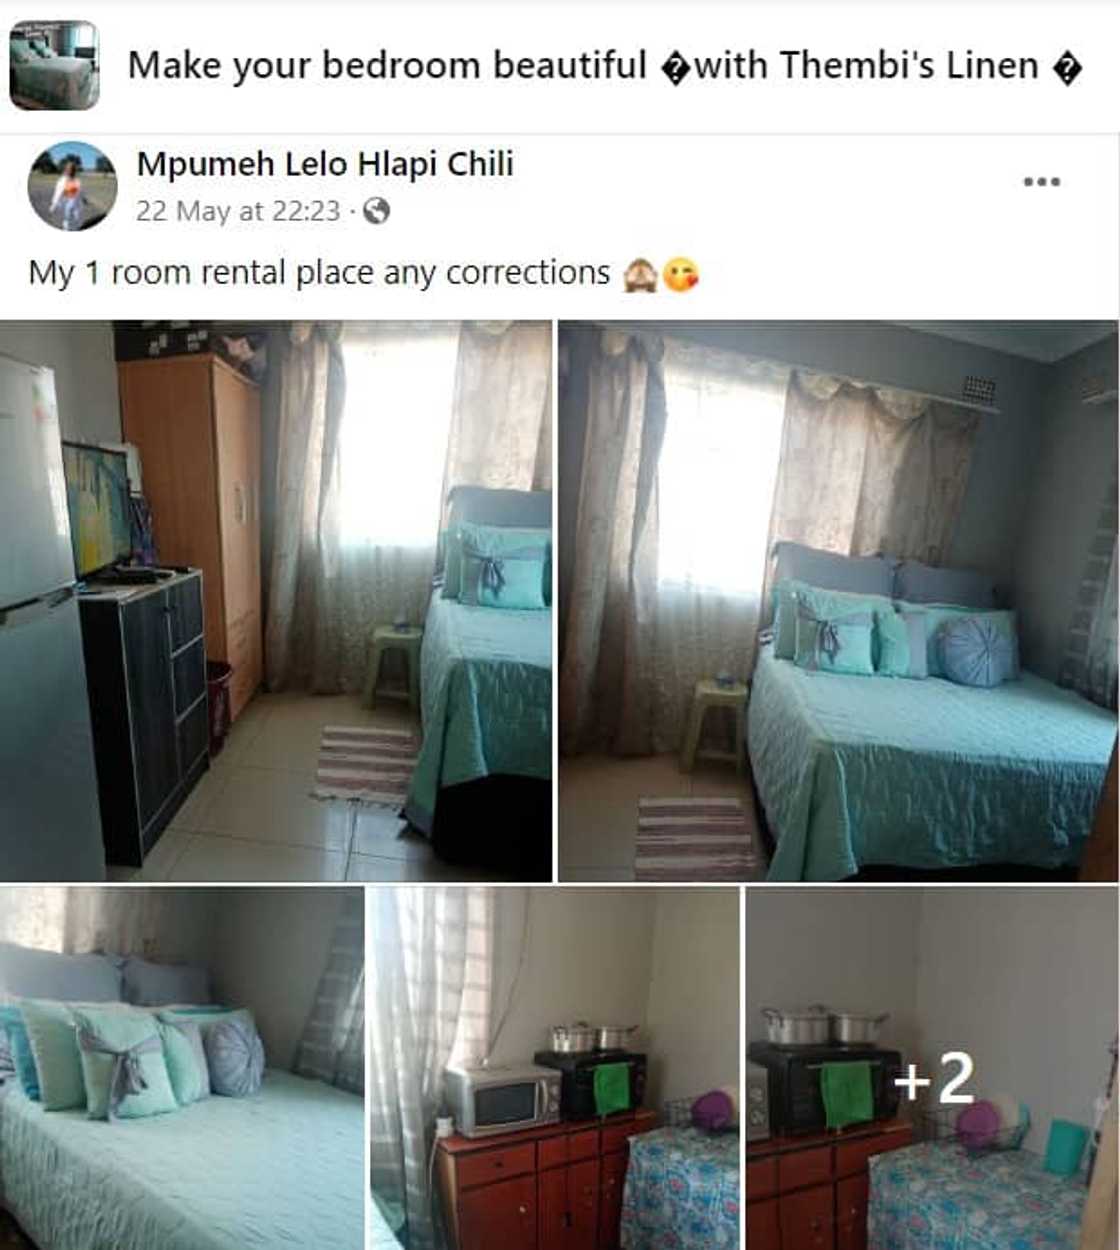 A screenshot of a woman's one-bedroom rental home.